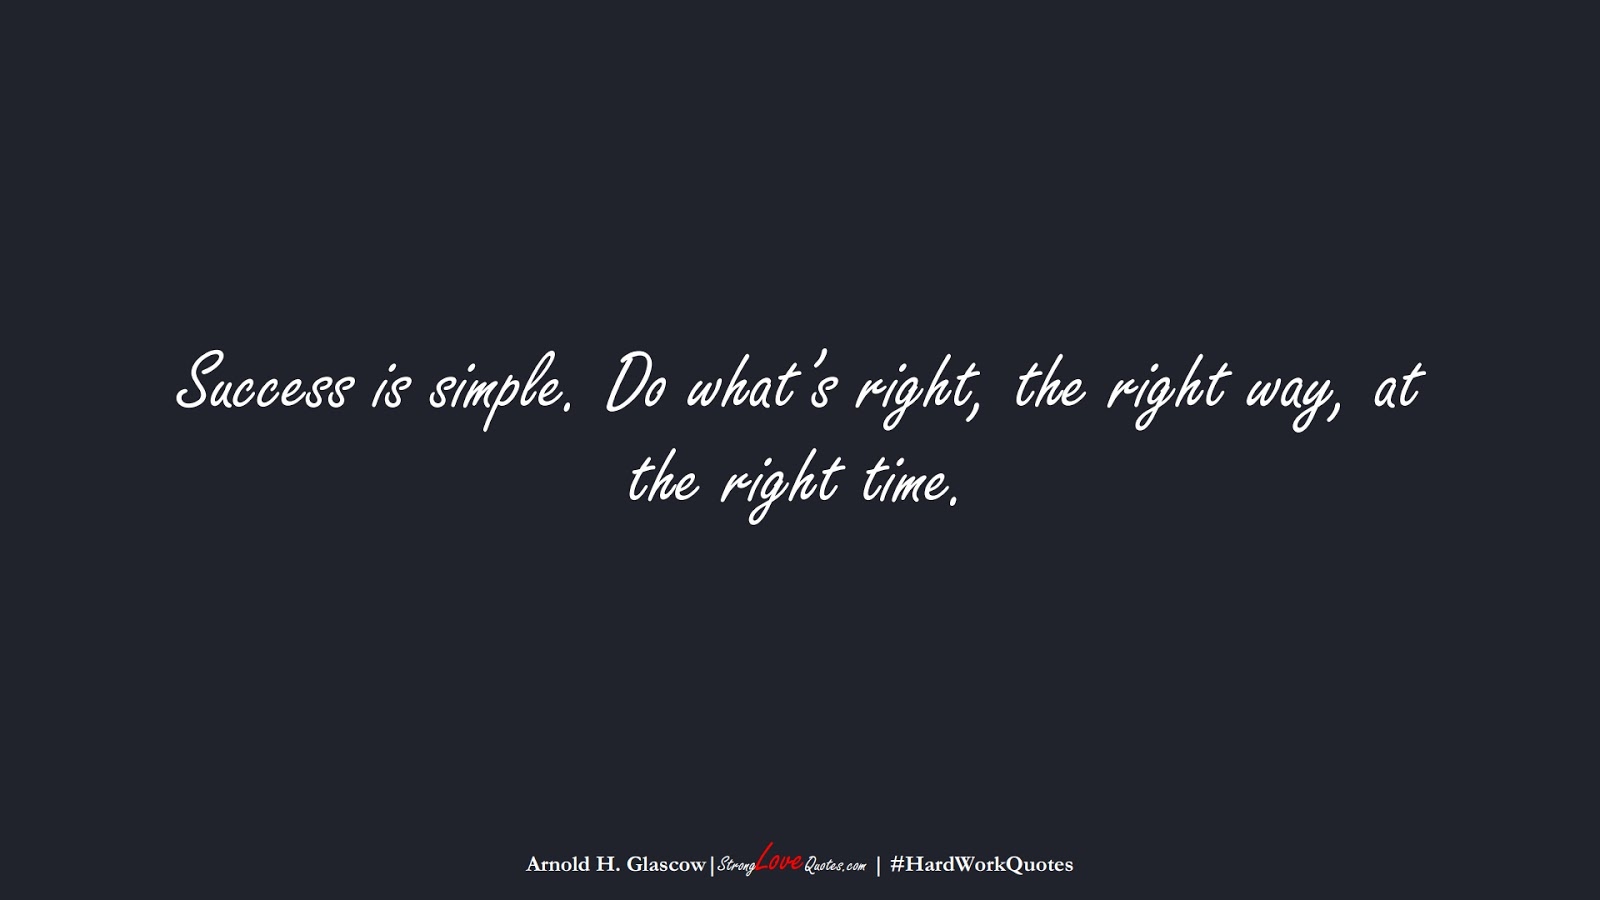 Success is simple. Do what’s right, the right way, at the right time. (Arnold H. Glascow);  #HardWorkQuotes